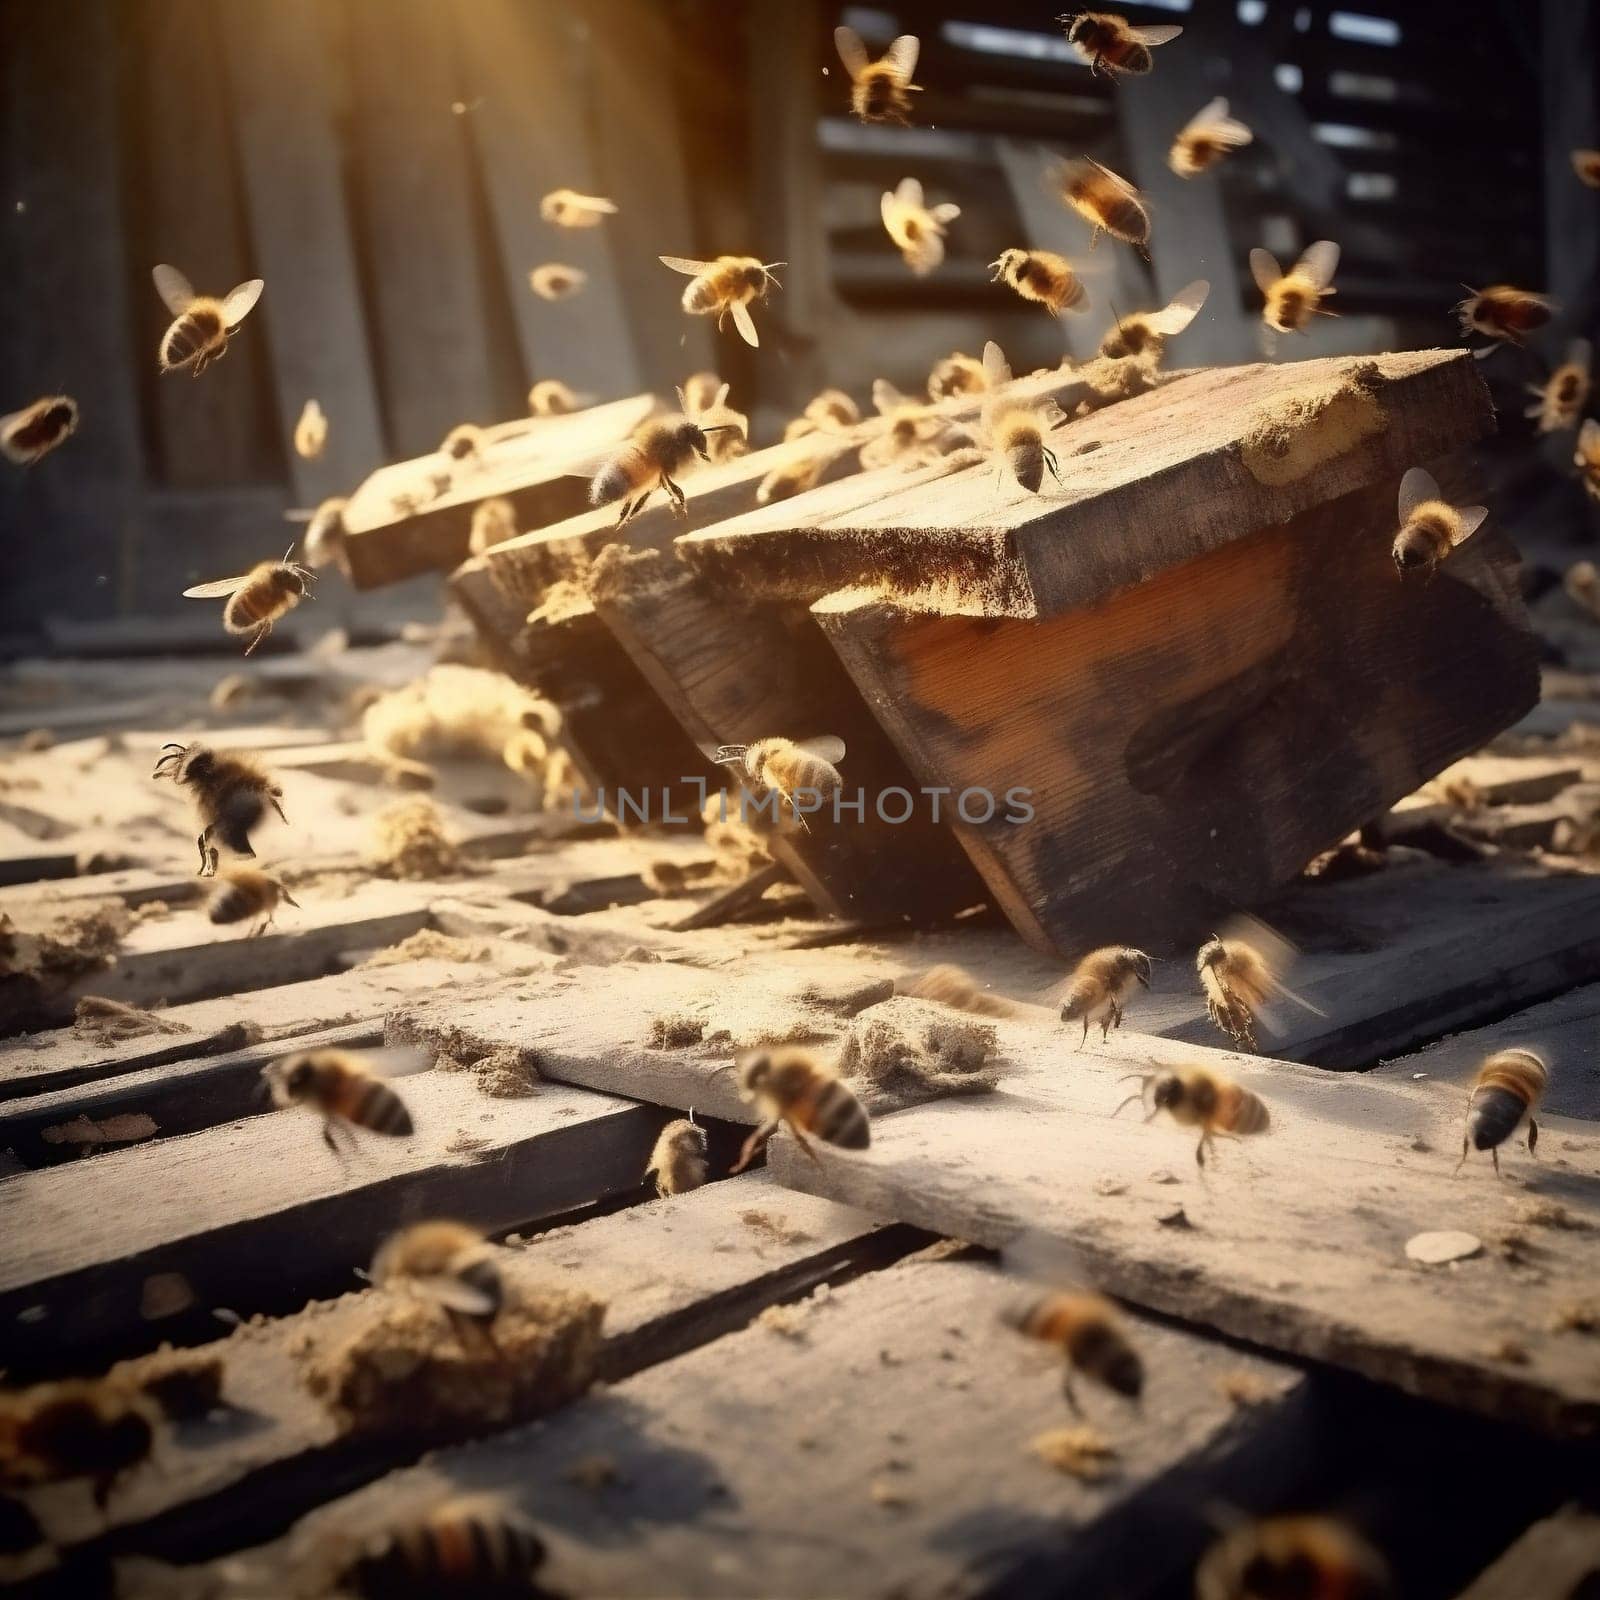 Agriculture animal honeycomb apiarist bees beeswax nature farm beekeeping pollination wax swarm hive apiary apiculture honey pollen colony insect beehive busy